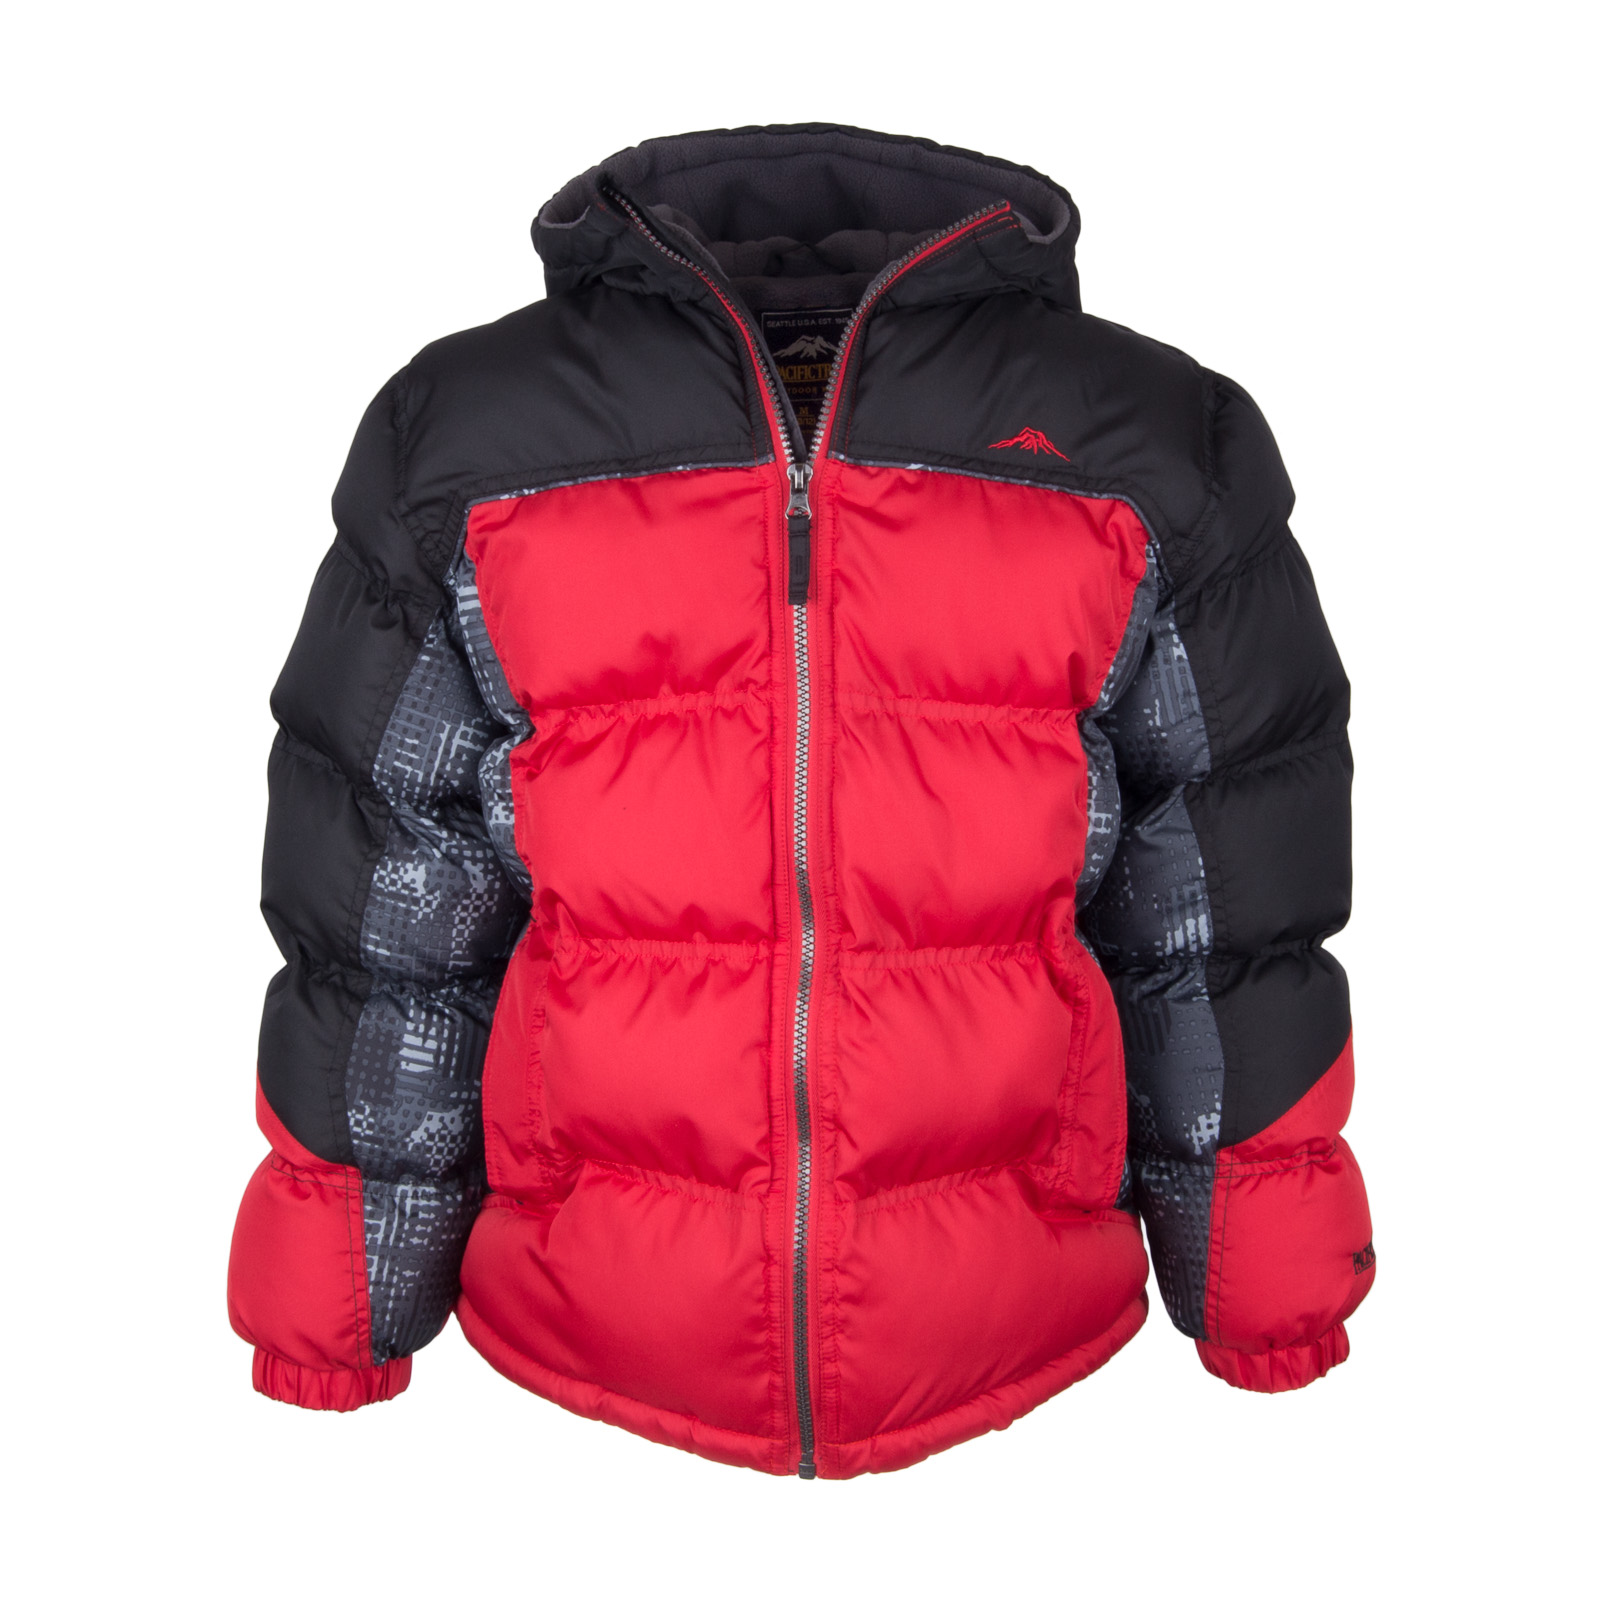 Heavy Weight Color Blocked Puffer with Print Insert and Fleece Lining